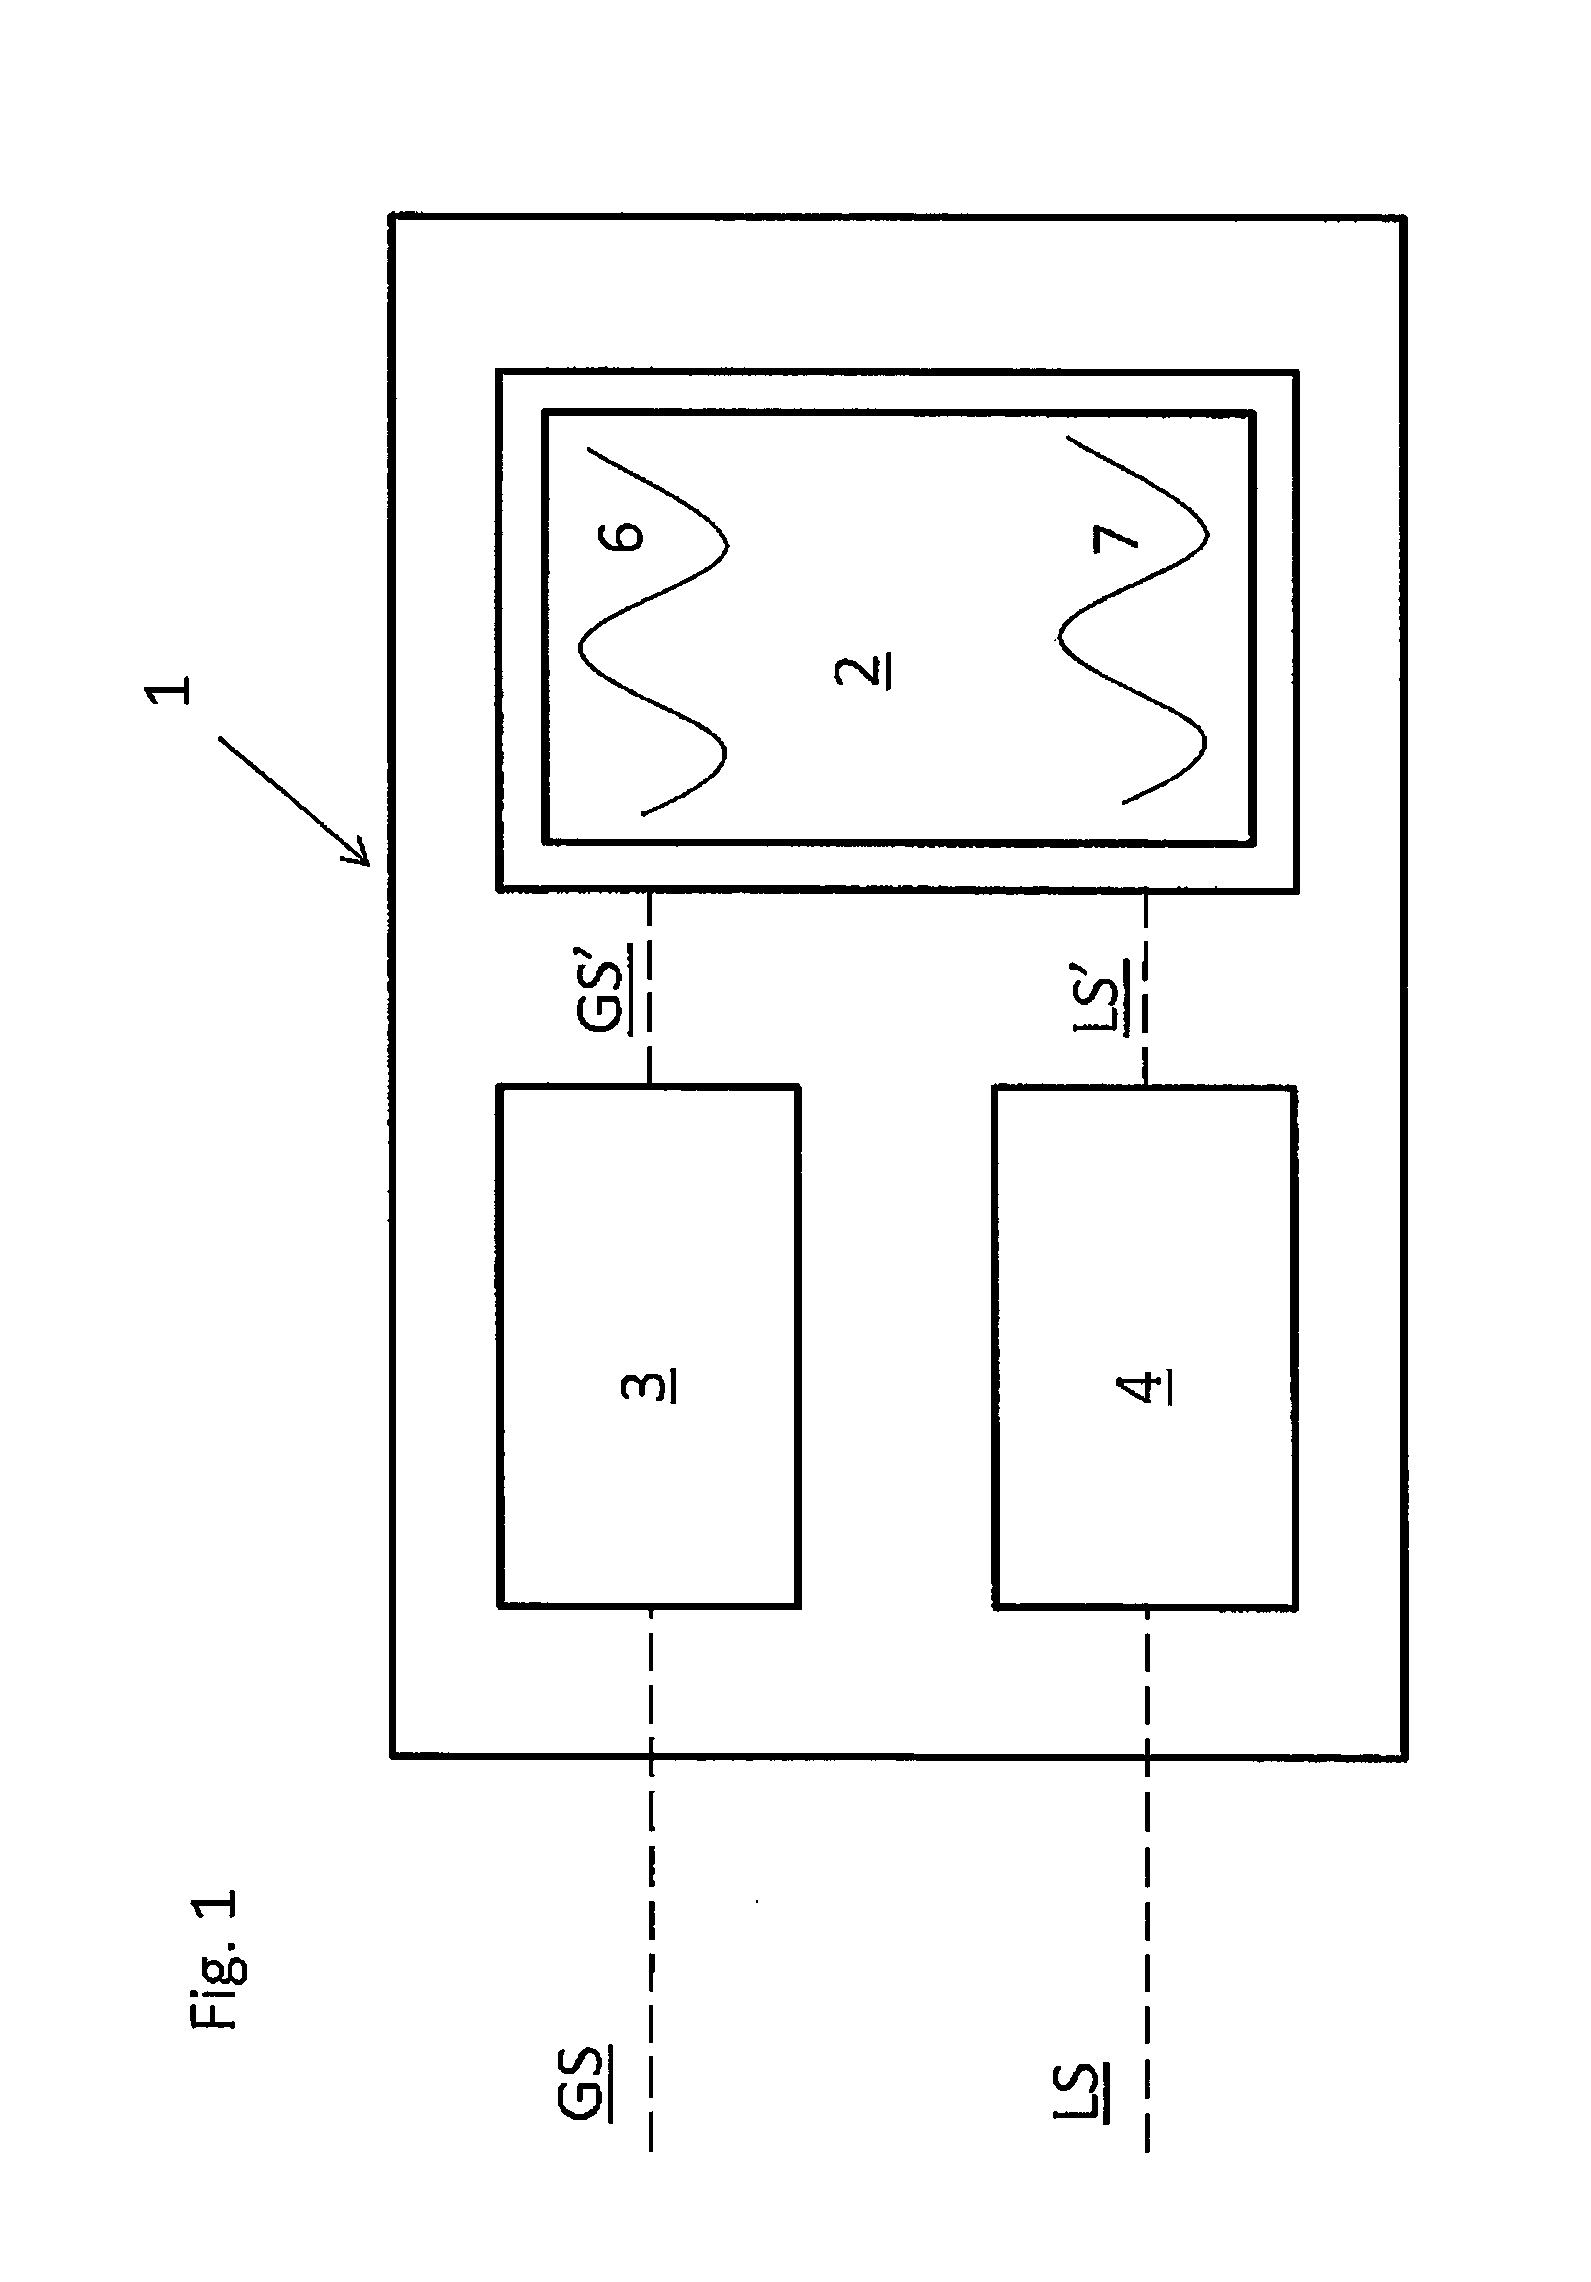 System and Method for Continuously Monitoring and Presenting Body Substances